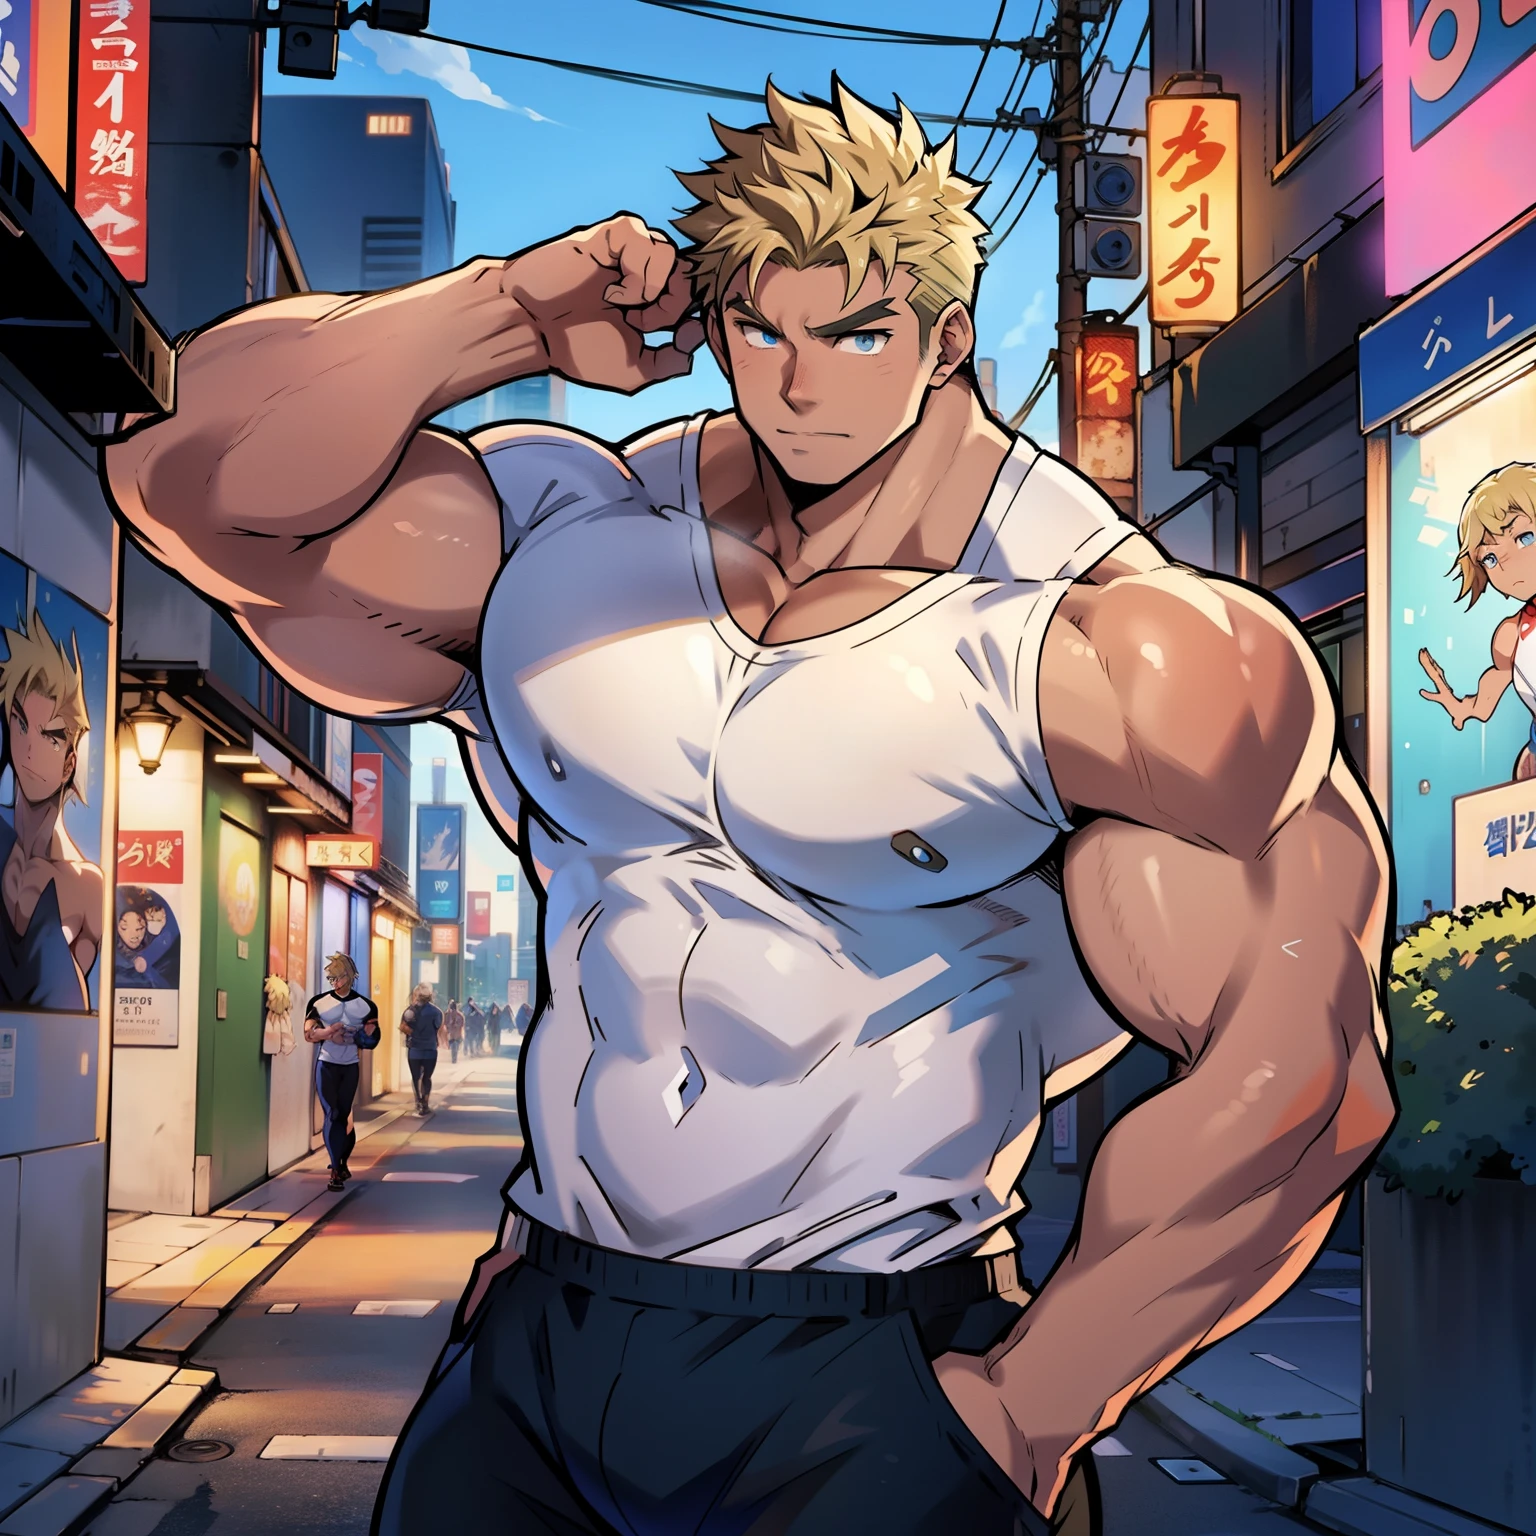 ((Anime style art)), Extremely muscular masculine character, pale skin, blonde hair, sapphire blue eyes, bodybuilder body, wearing a sleeveless V-neck shirt, hands raised at neck level, The character is leaning against a wall. Pockets, Futuristic cityscape, Busy route, Buildings, person
AS & Vehicles. Main character from the anime, Nice image, Hard drive, 4k, Main character leaning against a wall with his hands at face level.